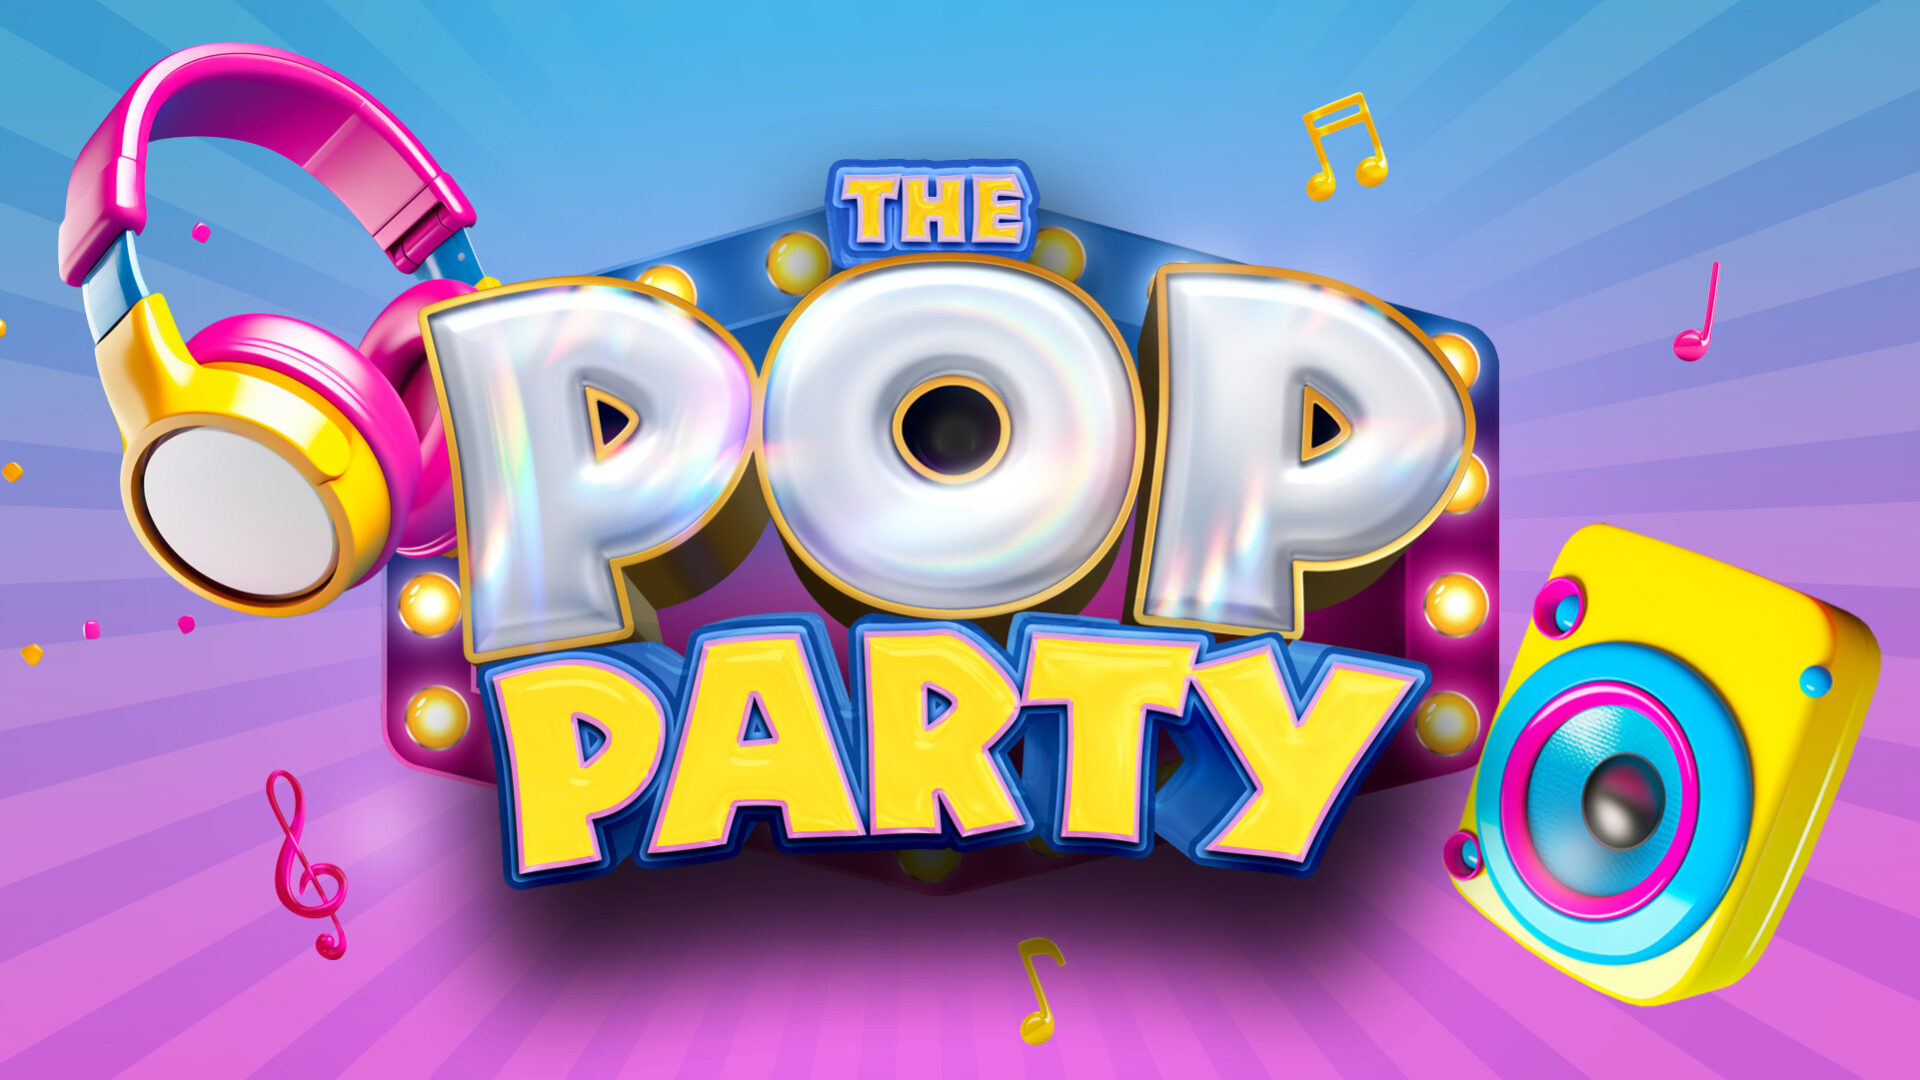 The Pop Party!